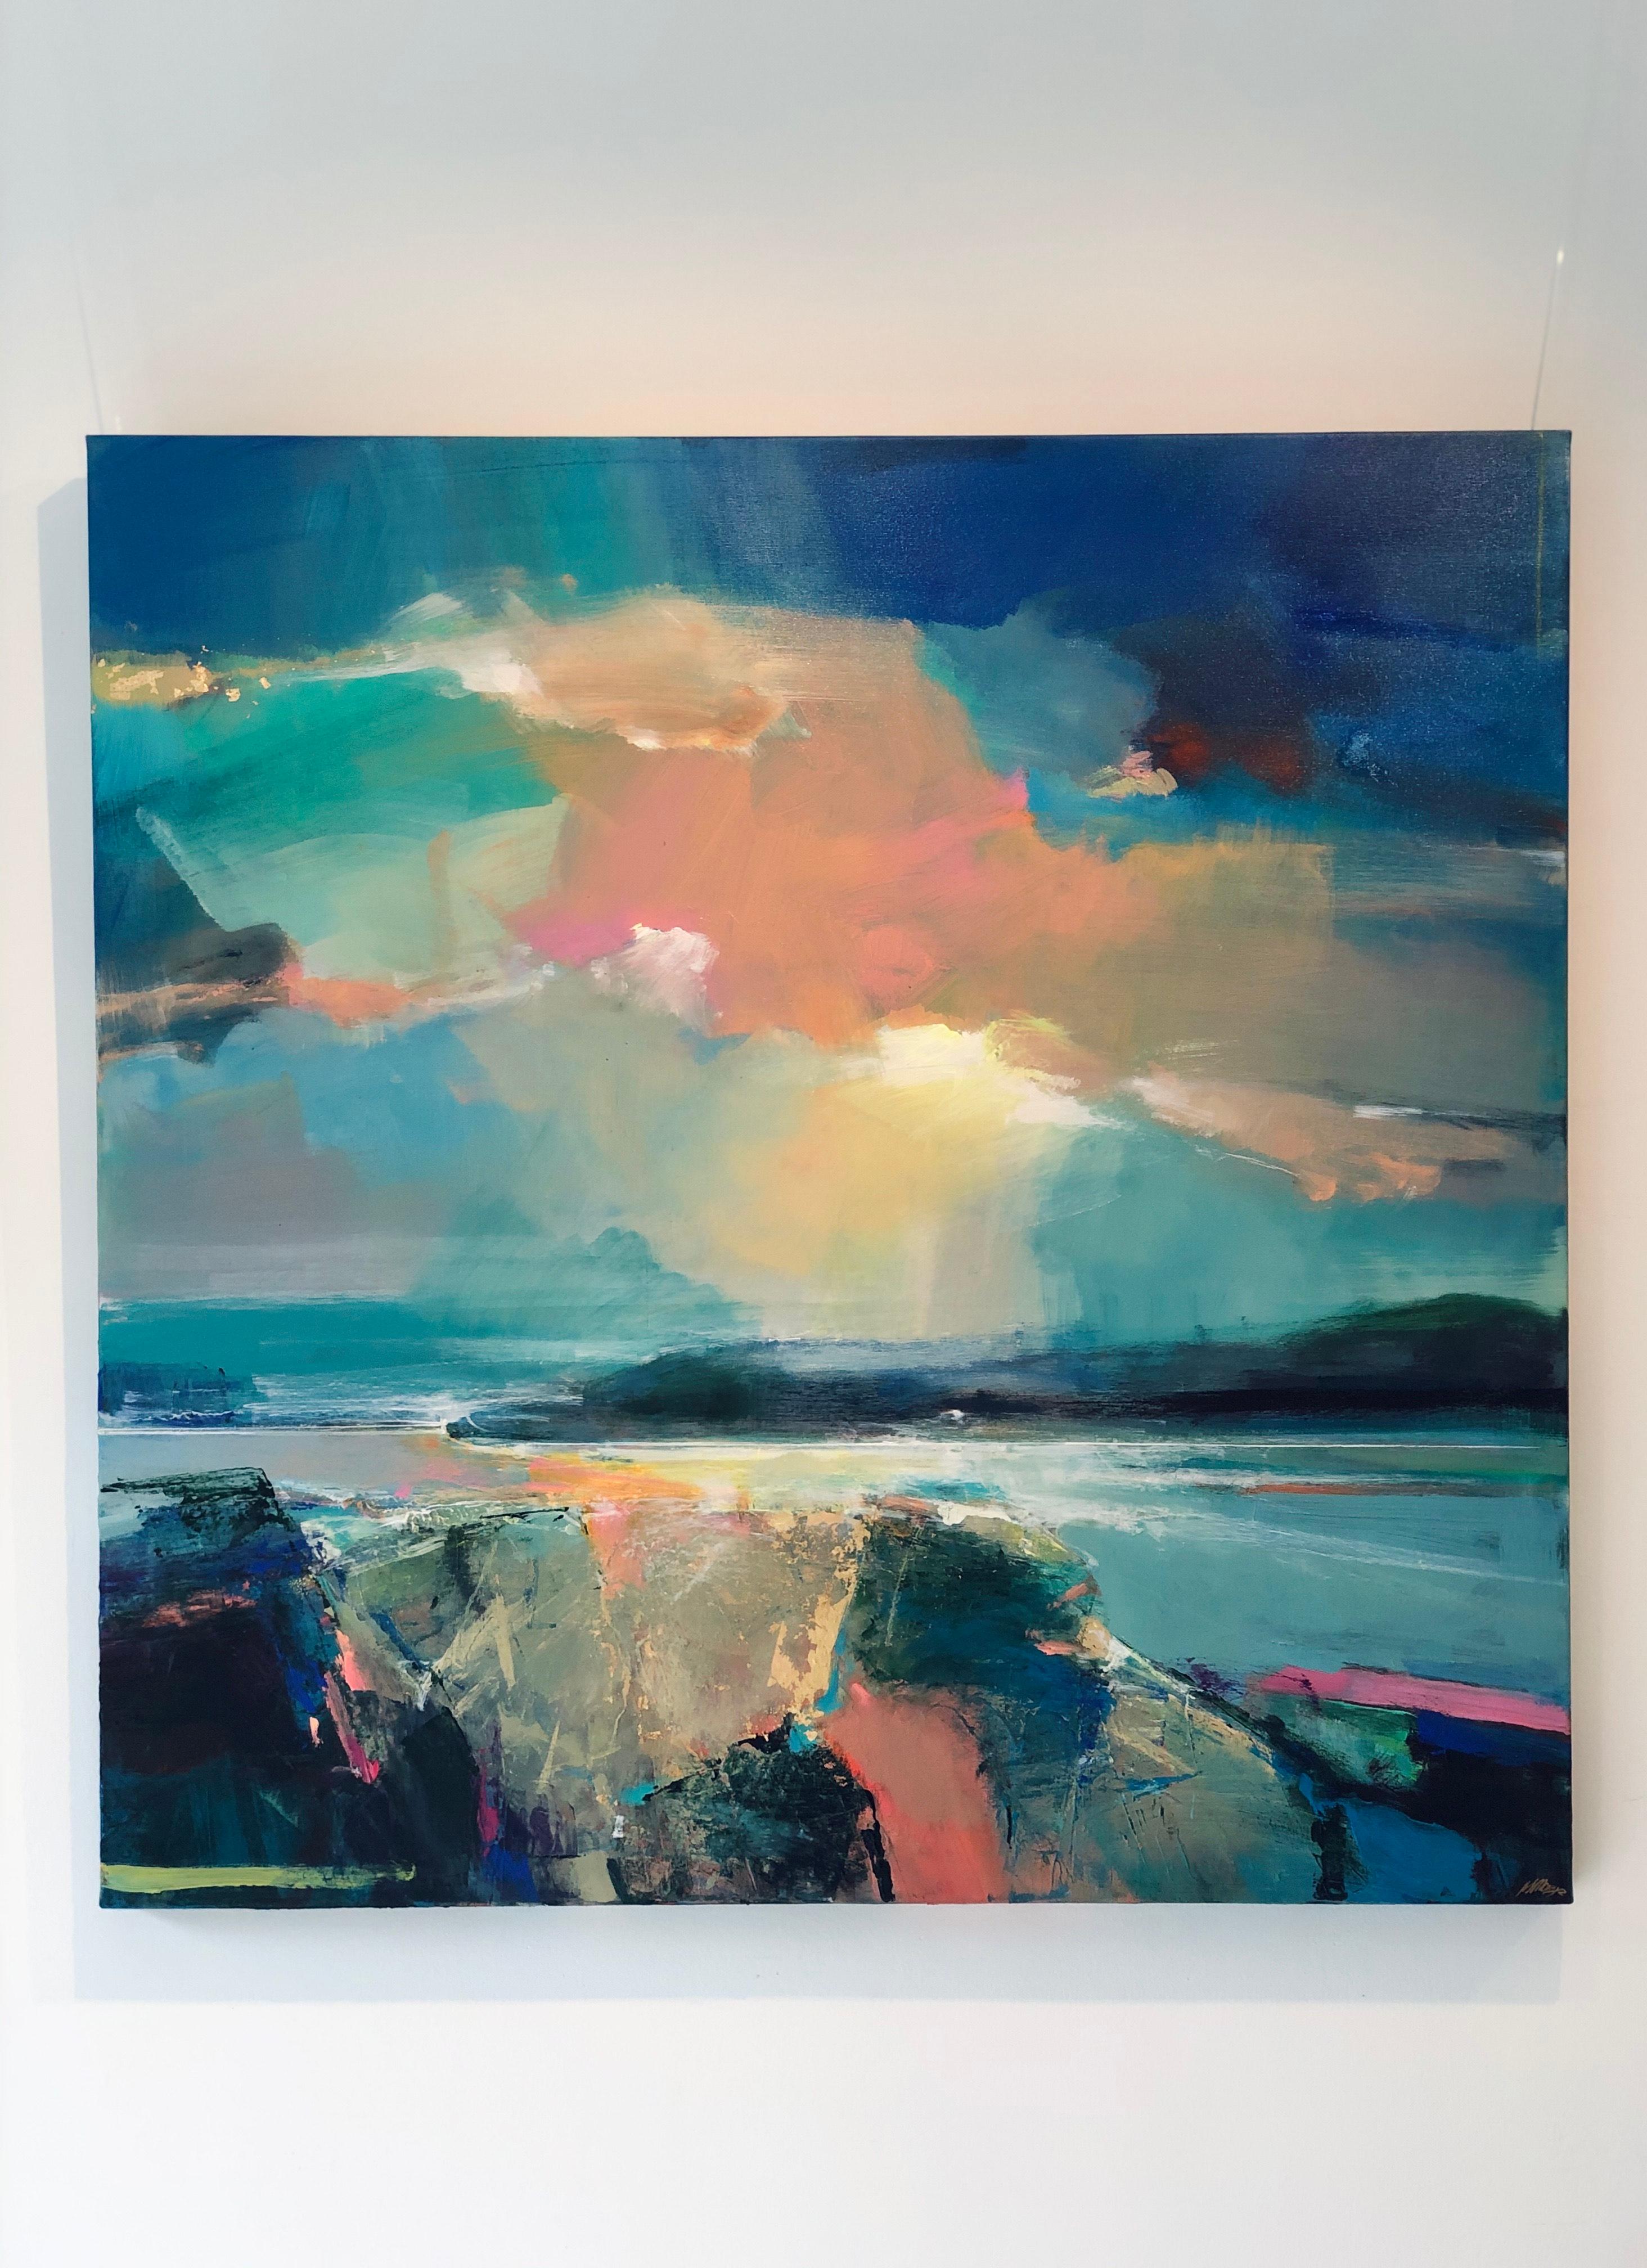 Warm Skies 5-Original abstract coastal seascape oil painting-contemporary Art - Painting by Magdalena Morey